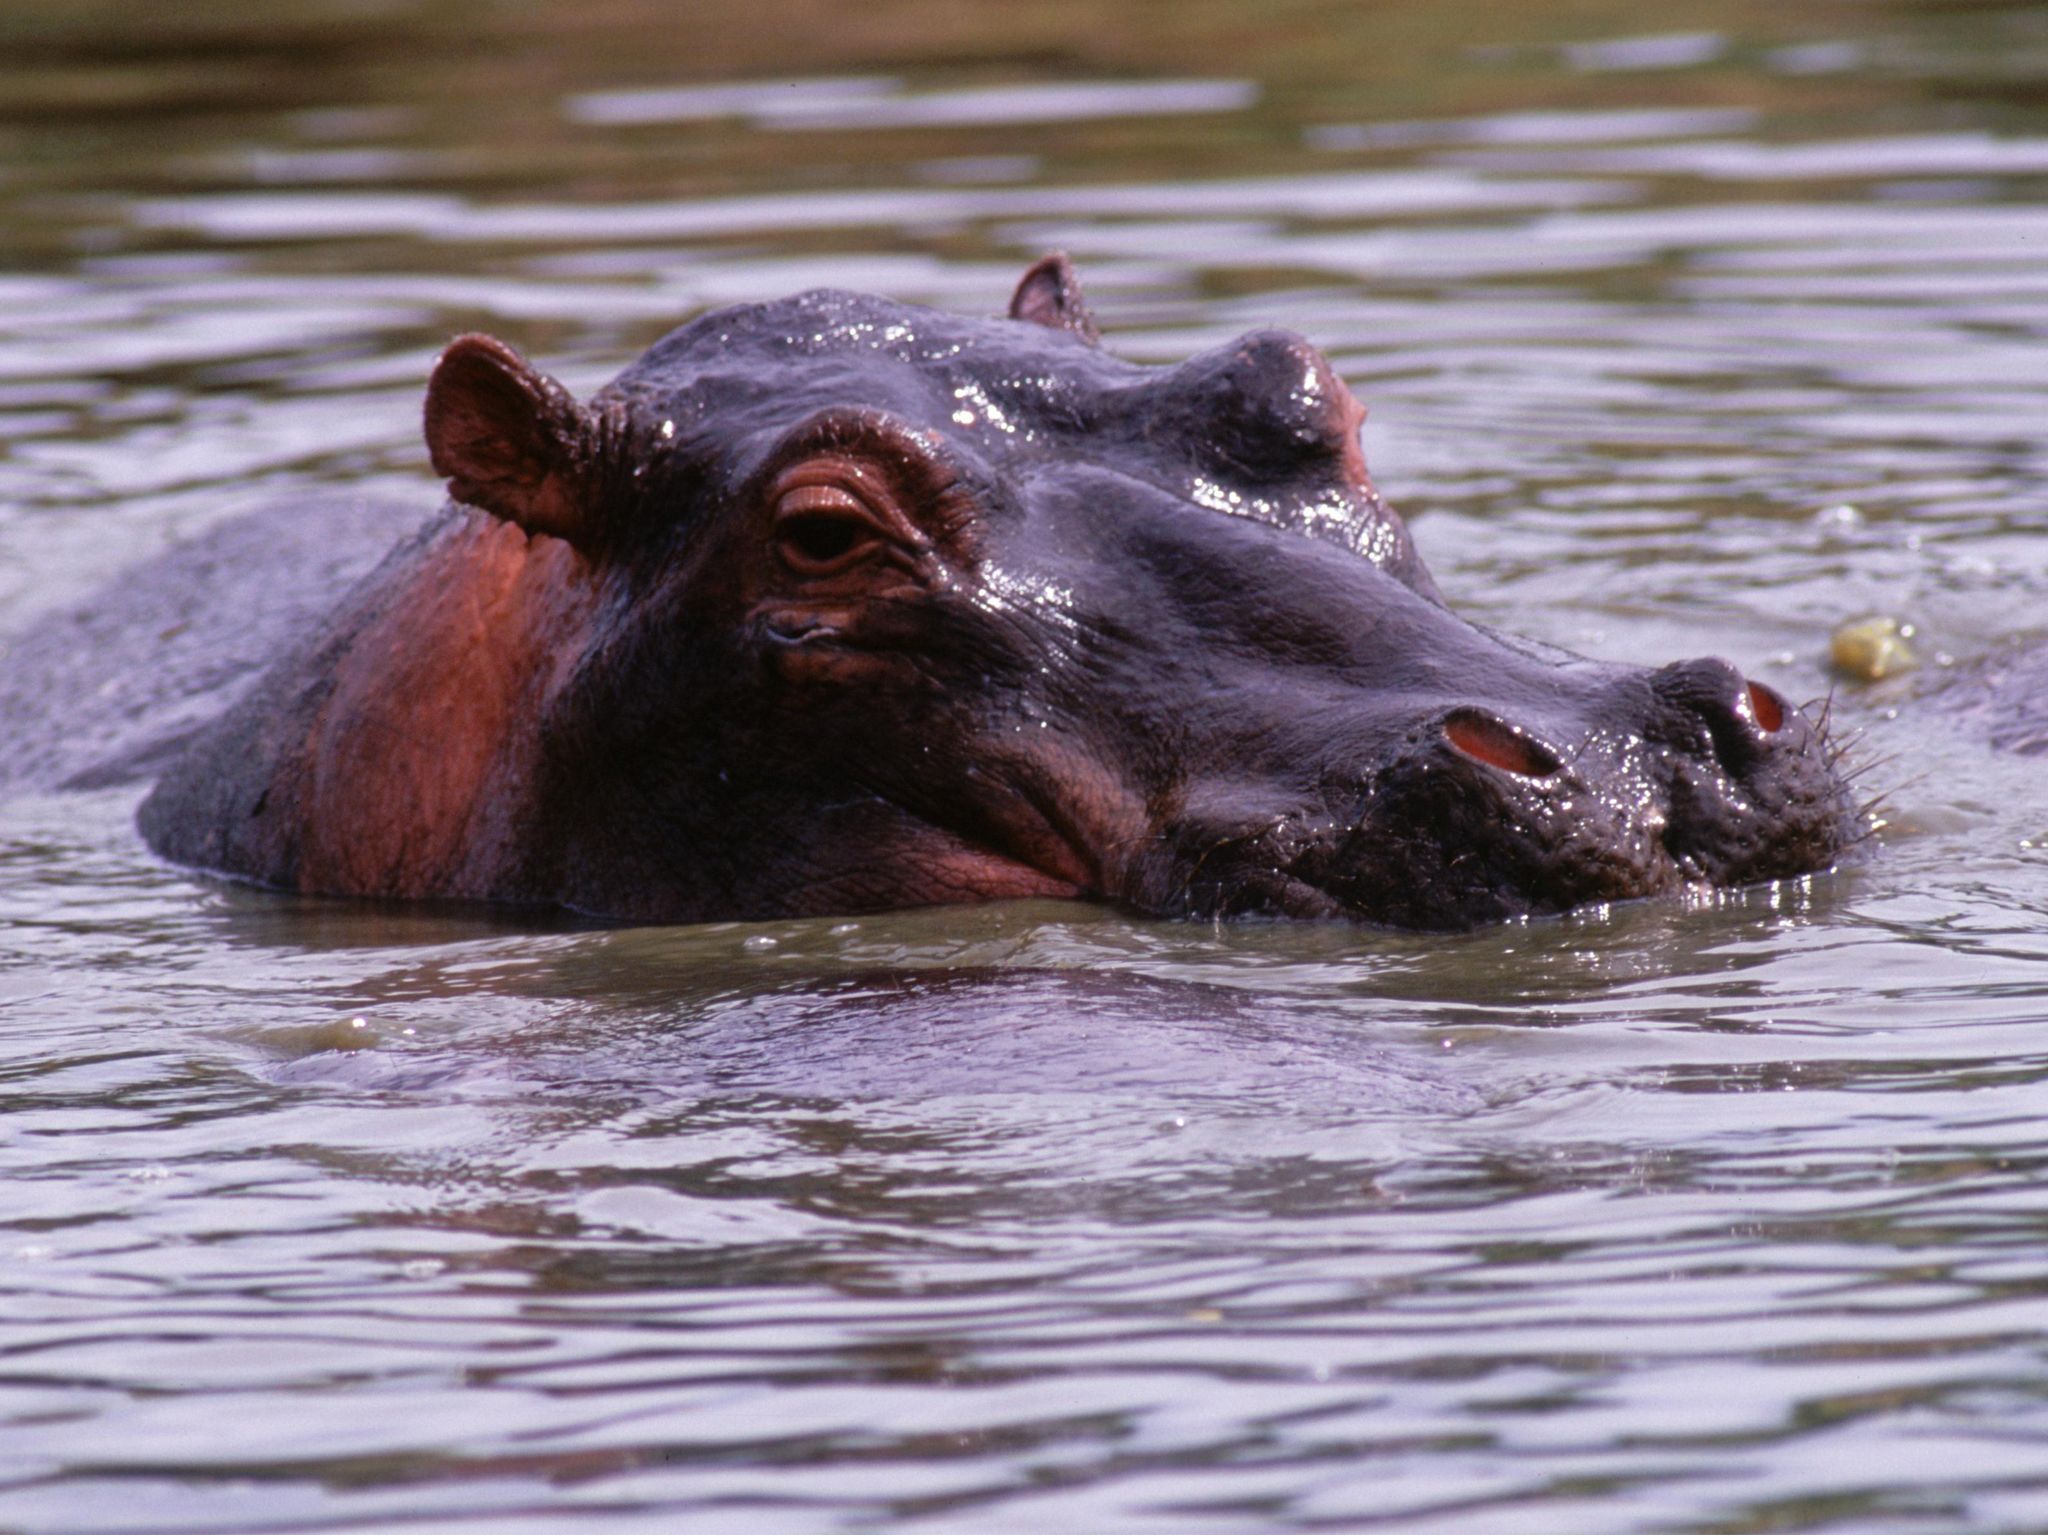 Hippopotamus in water. This image is from Equator's Wild Secrets. [Photo of the day - July 2020]